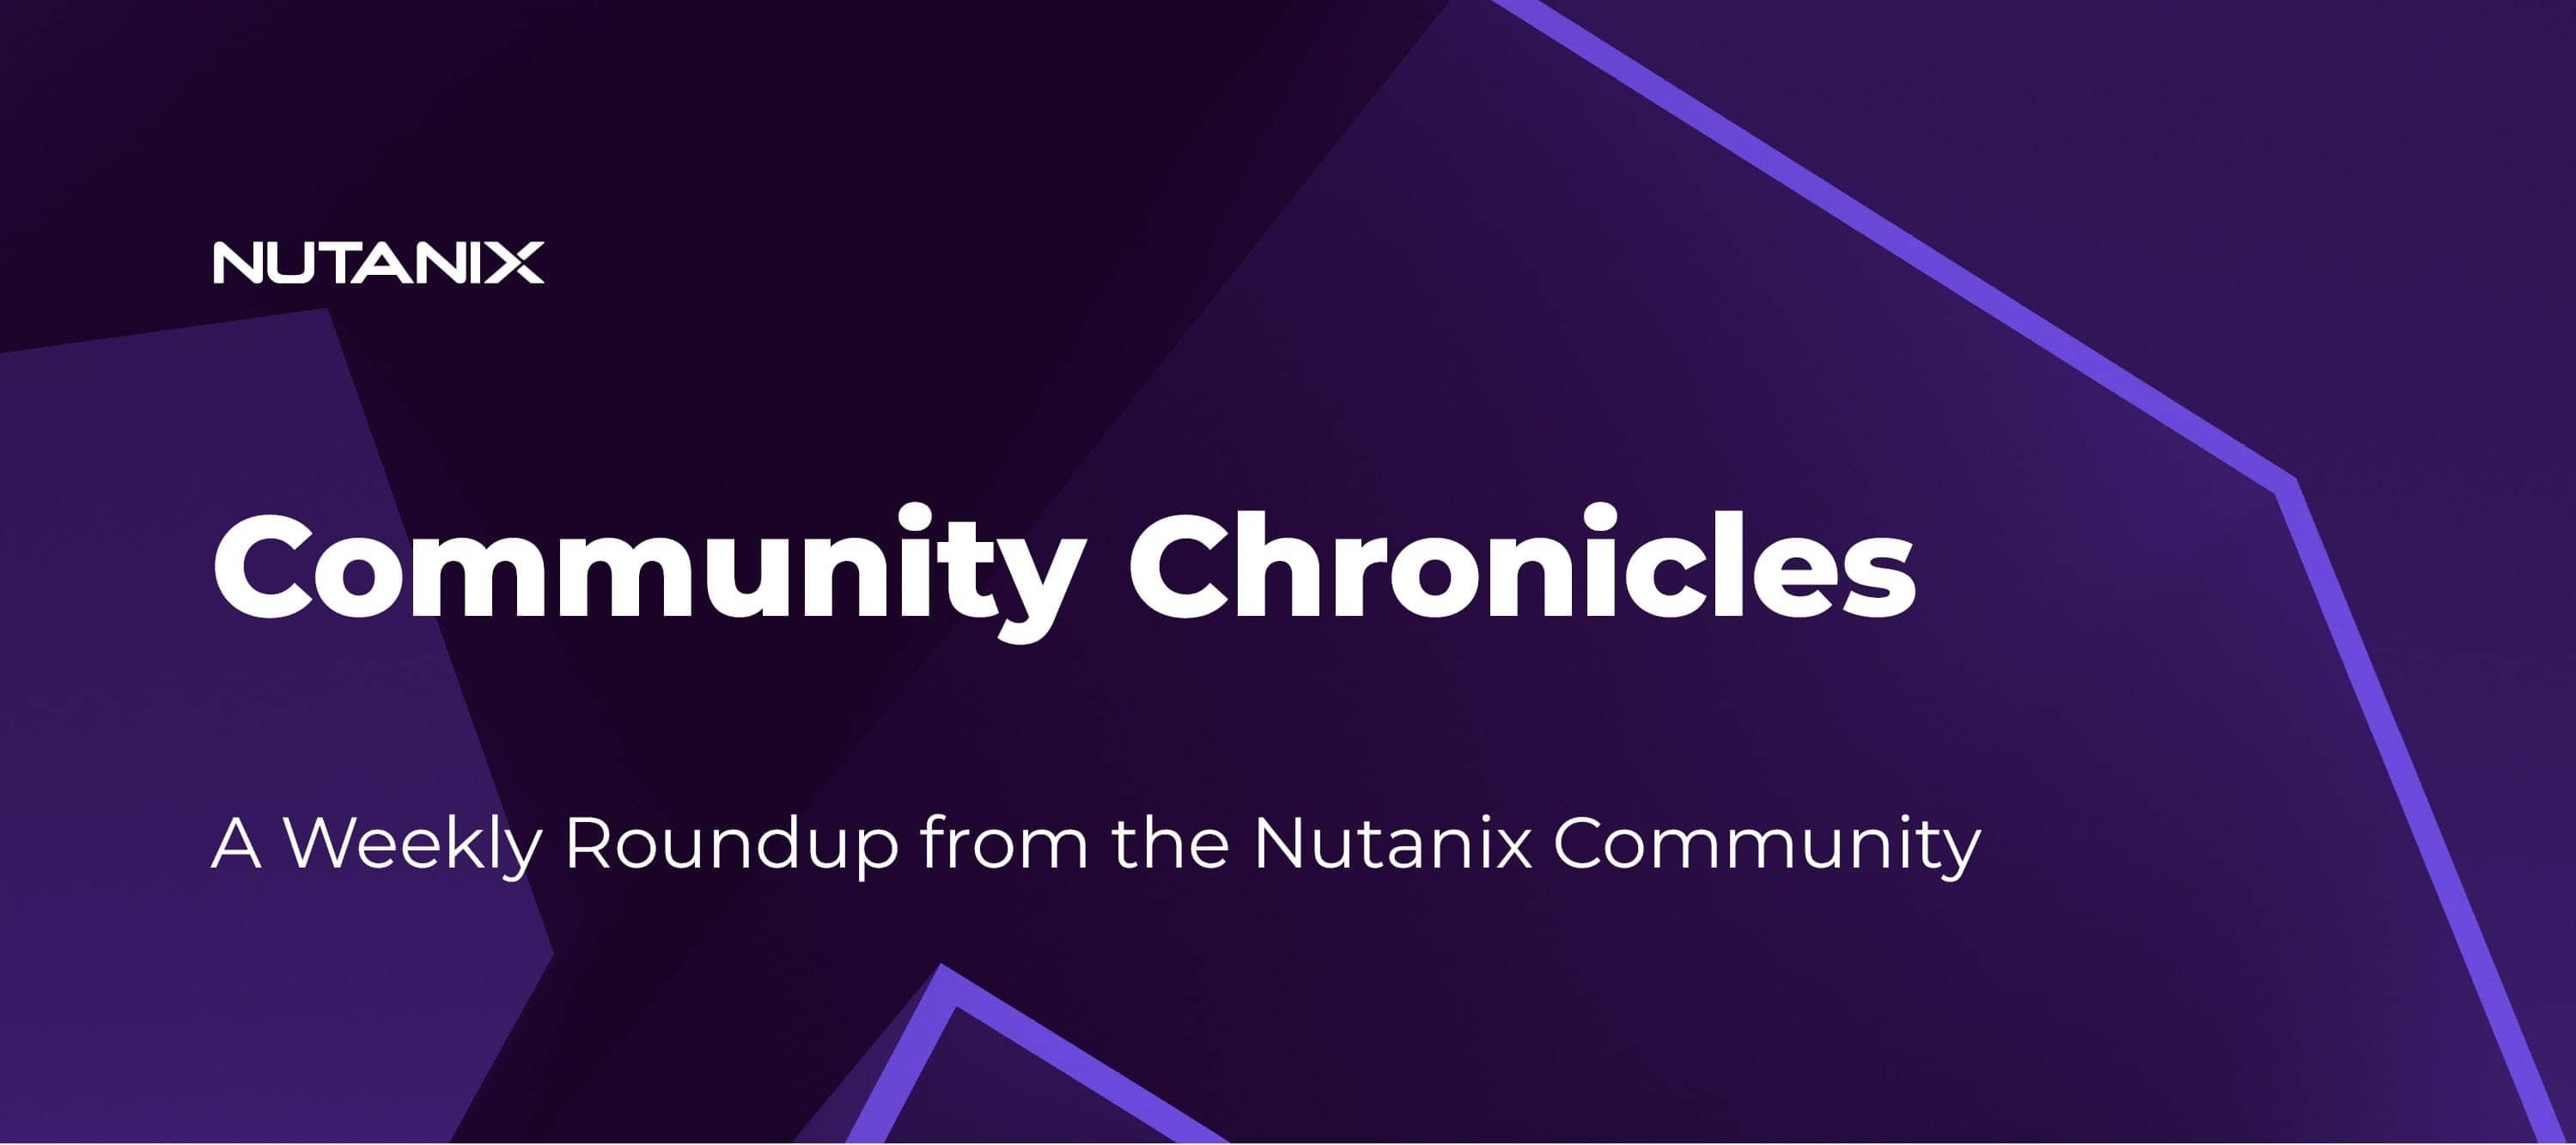 Community Chronicles: A Weekly Roundup from the Nutanix Community